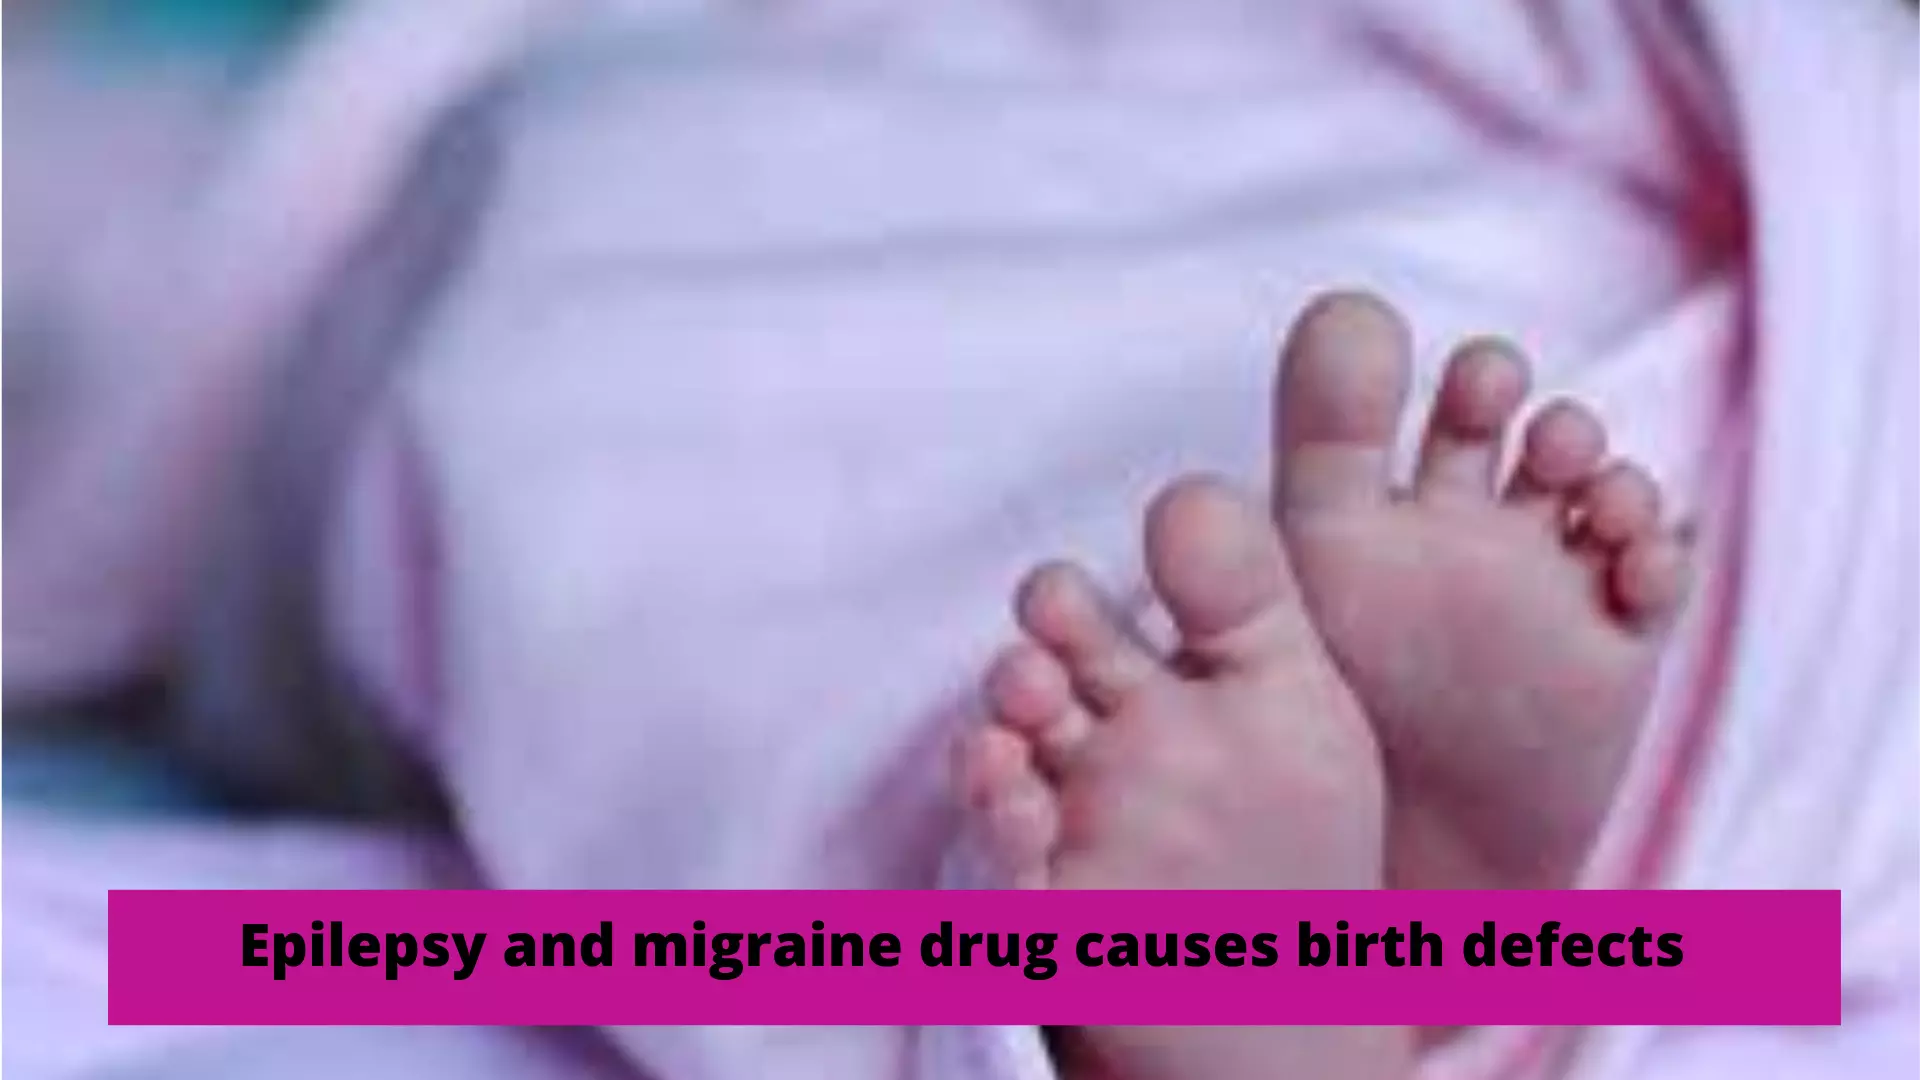 Epilepsy and migraine drug causes birth defects